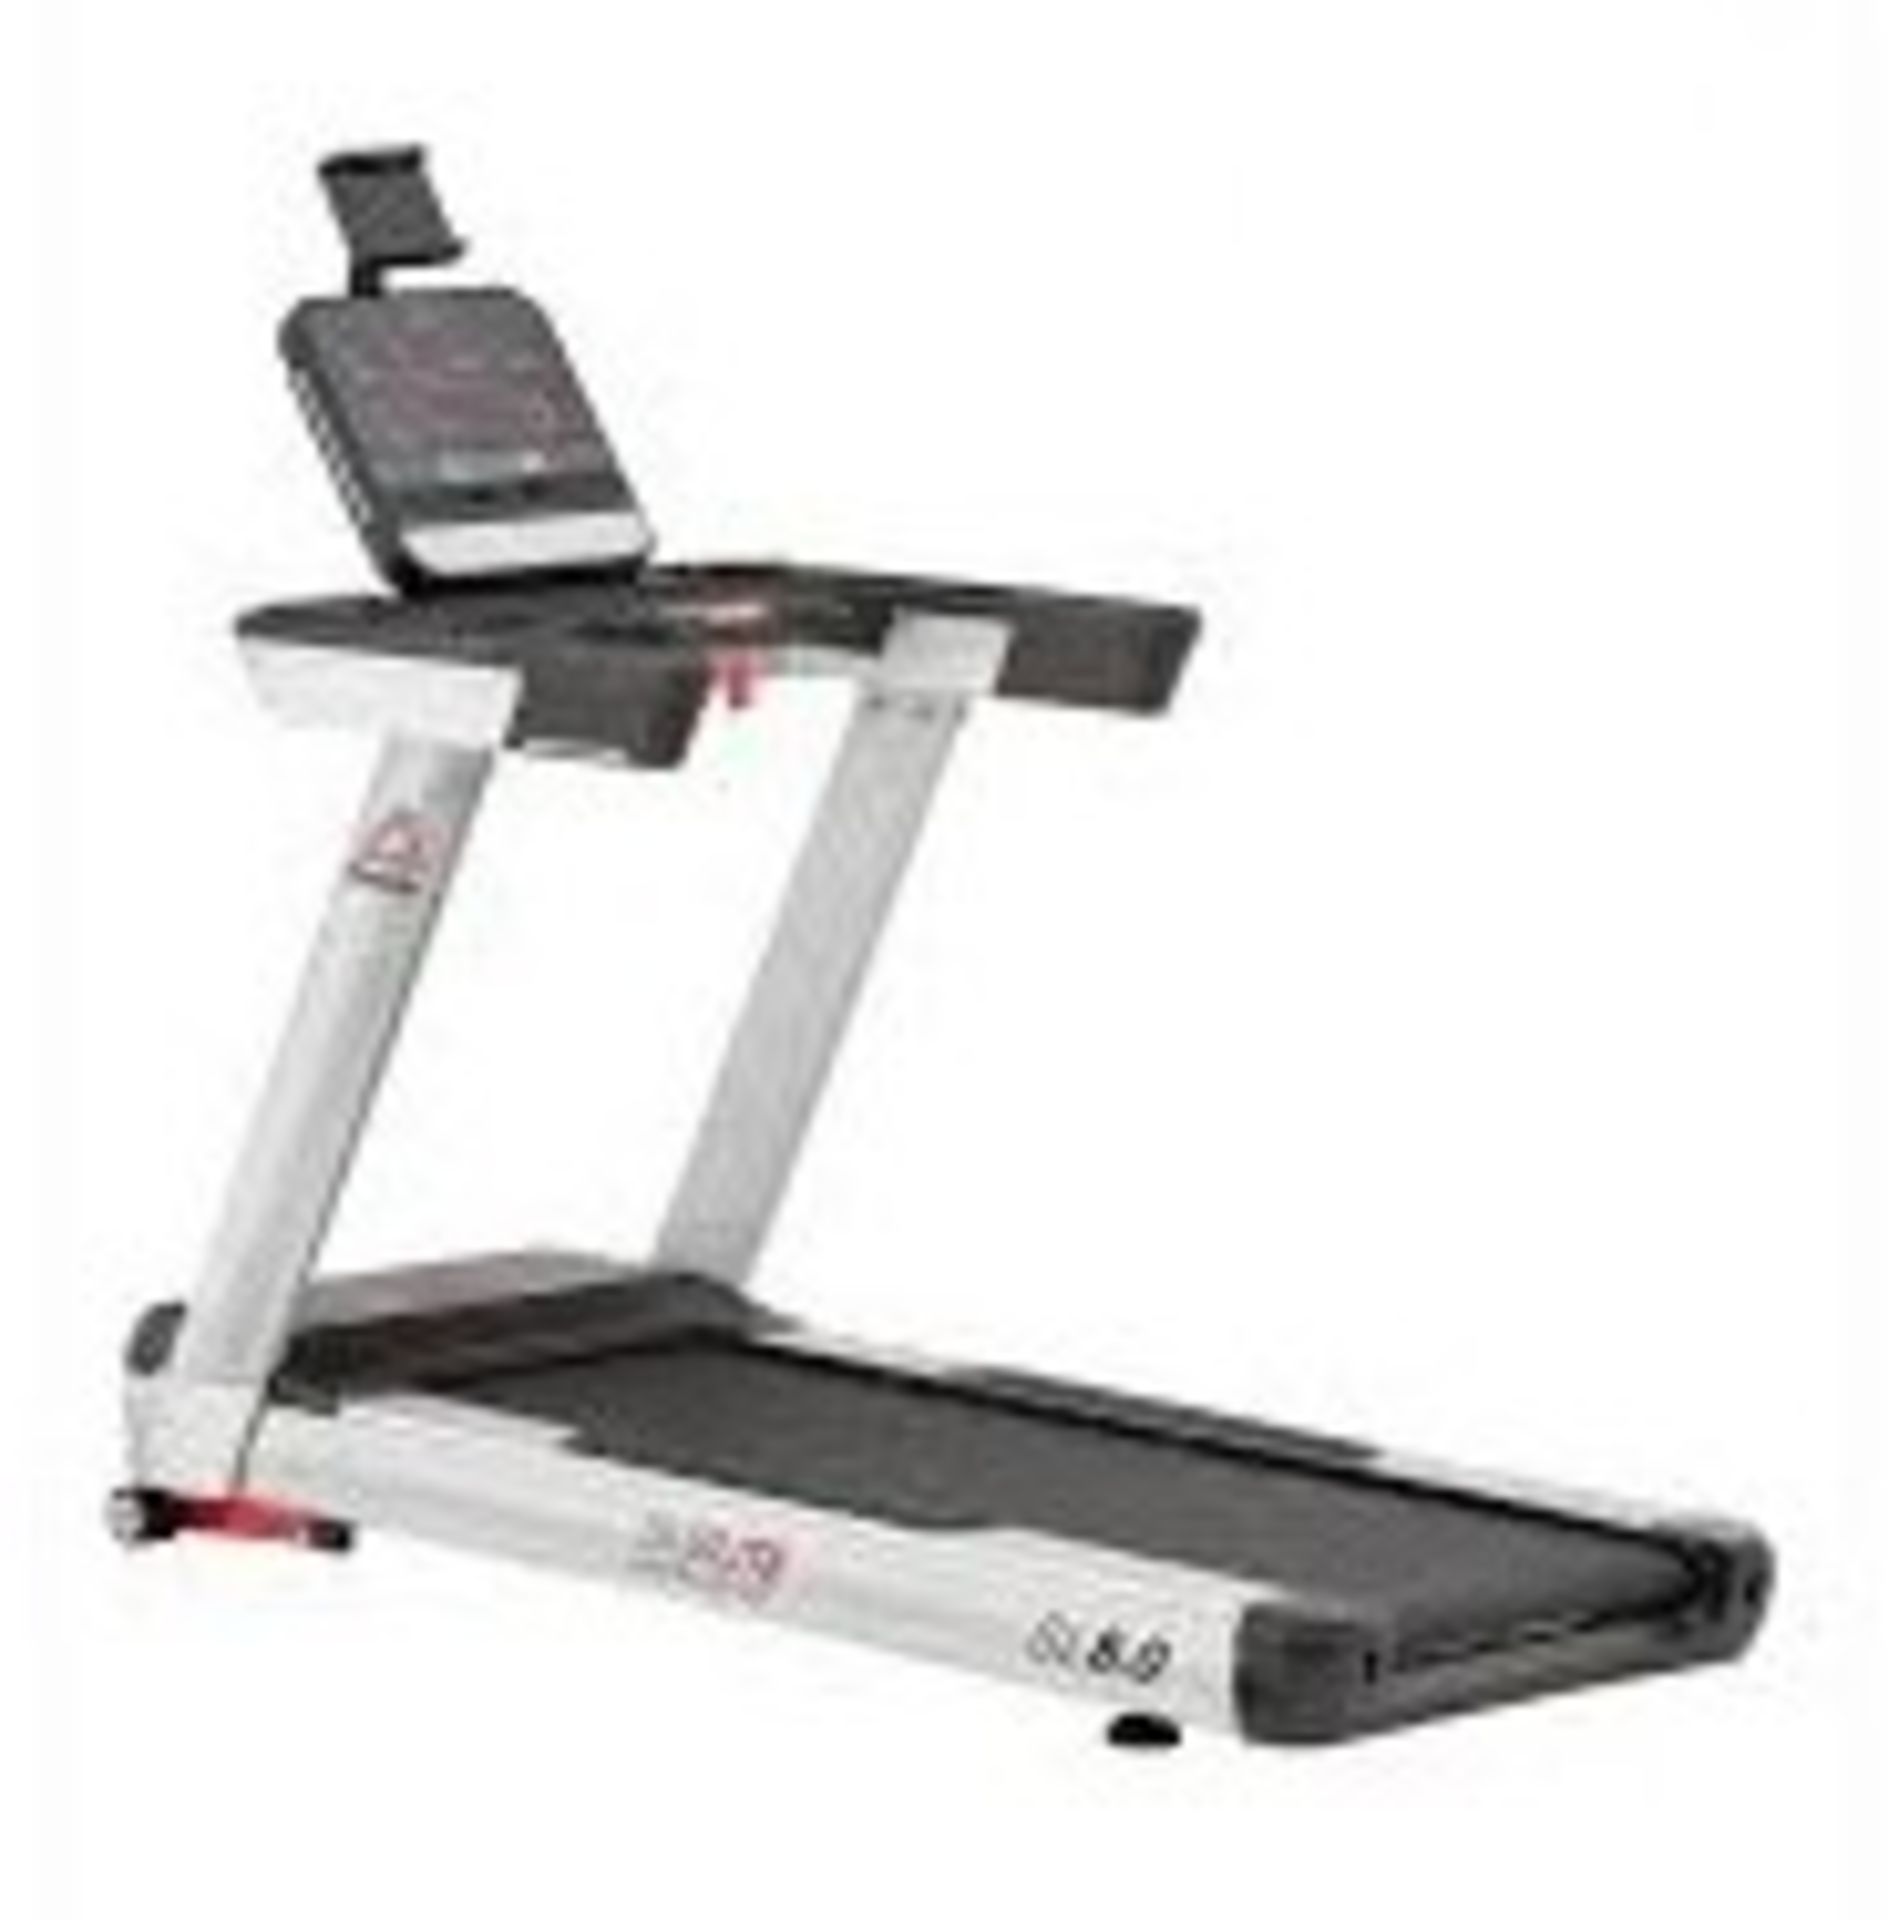 1 X BOXED REEBOK SL8.0 AC TREADMILL IN SILVER - IN 1 BOX ( PLEASE NOTE CUSTOMER RETURN AND DAMAGE ON